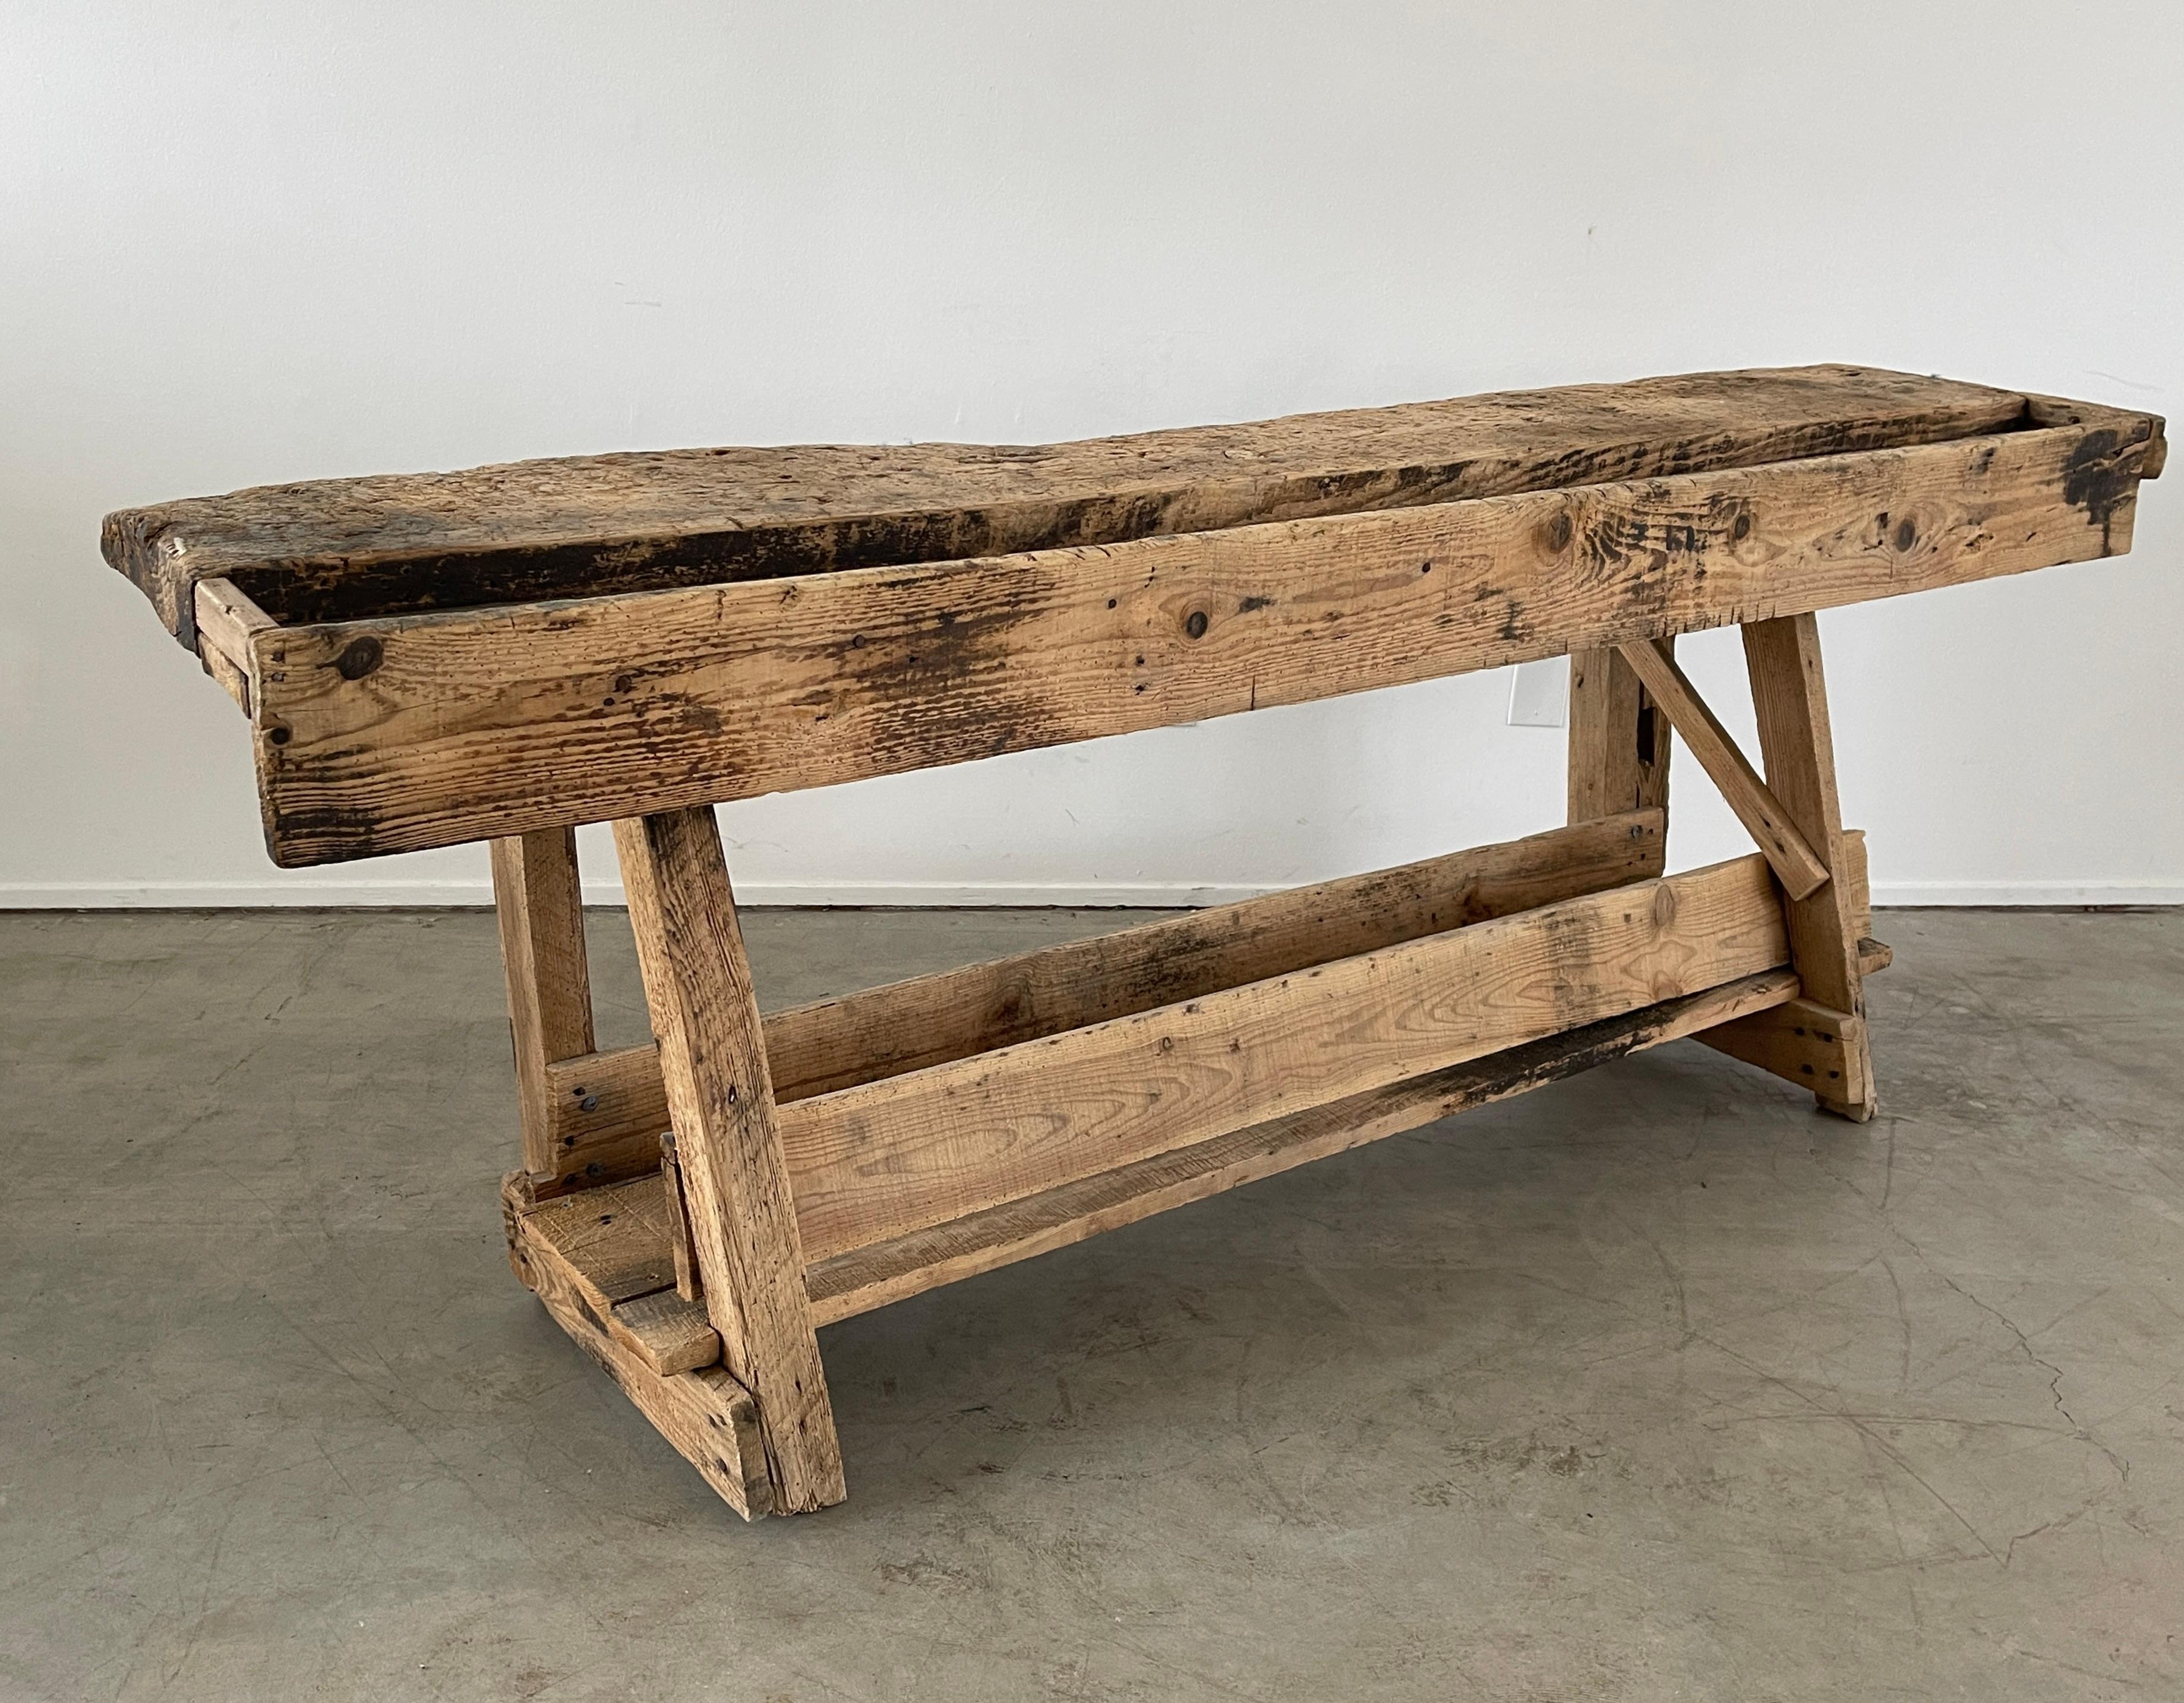 Large Brutalist carpenters bench with patina due to age in all the right places. 
Functional design with lower shelf.